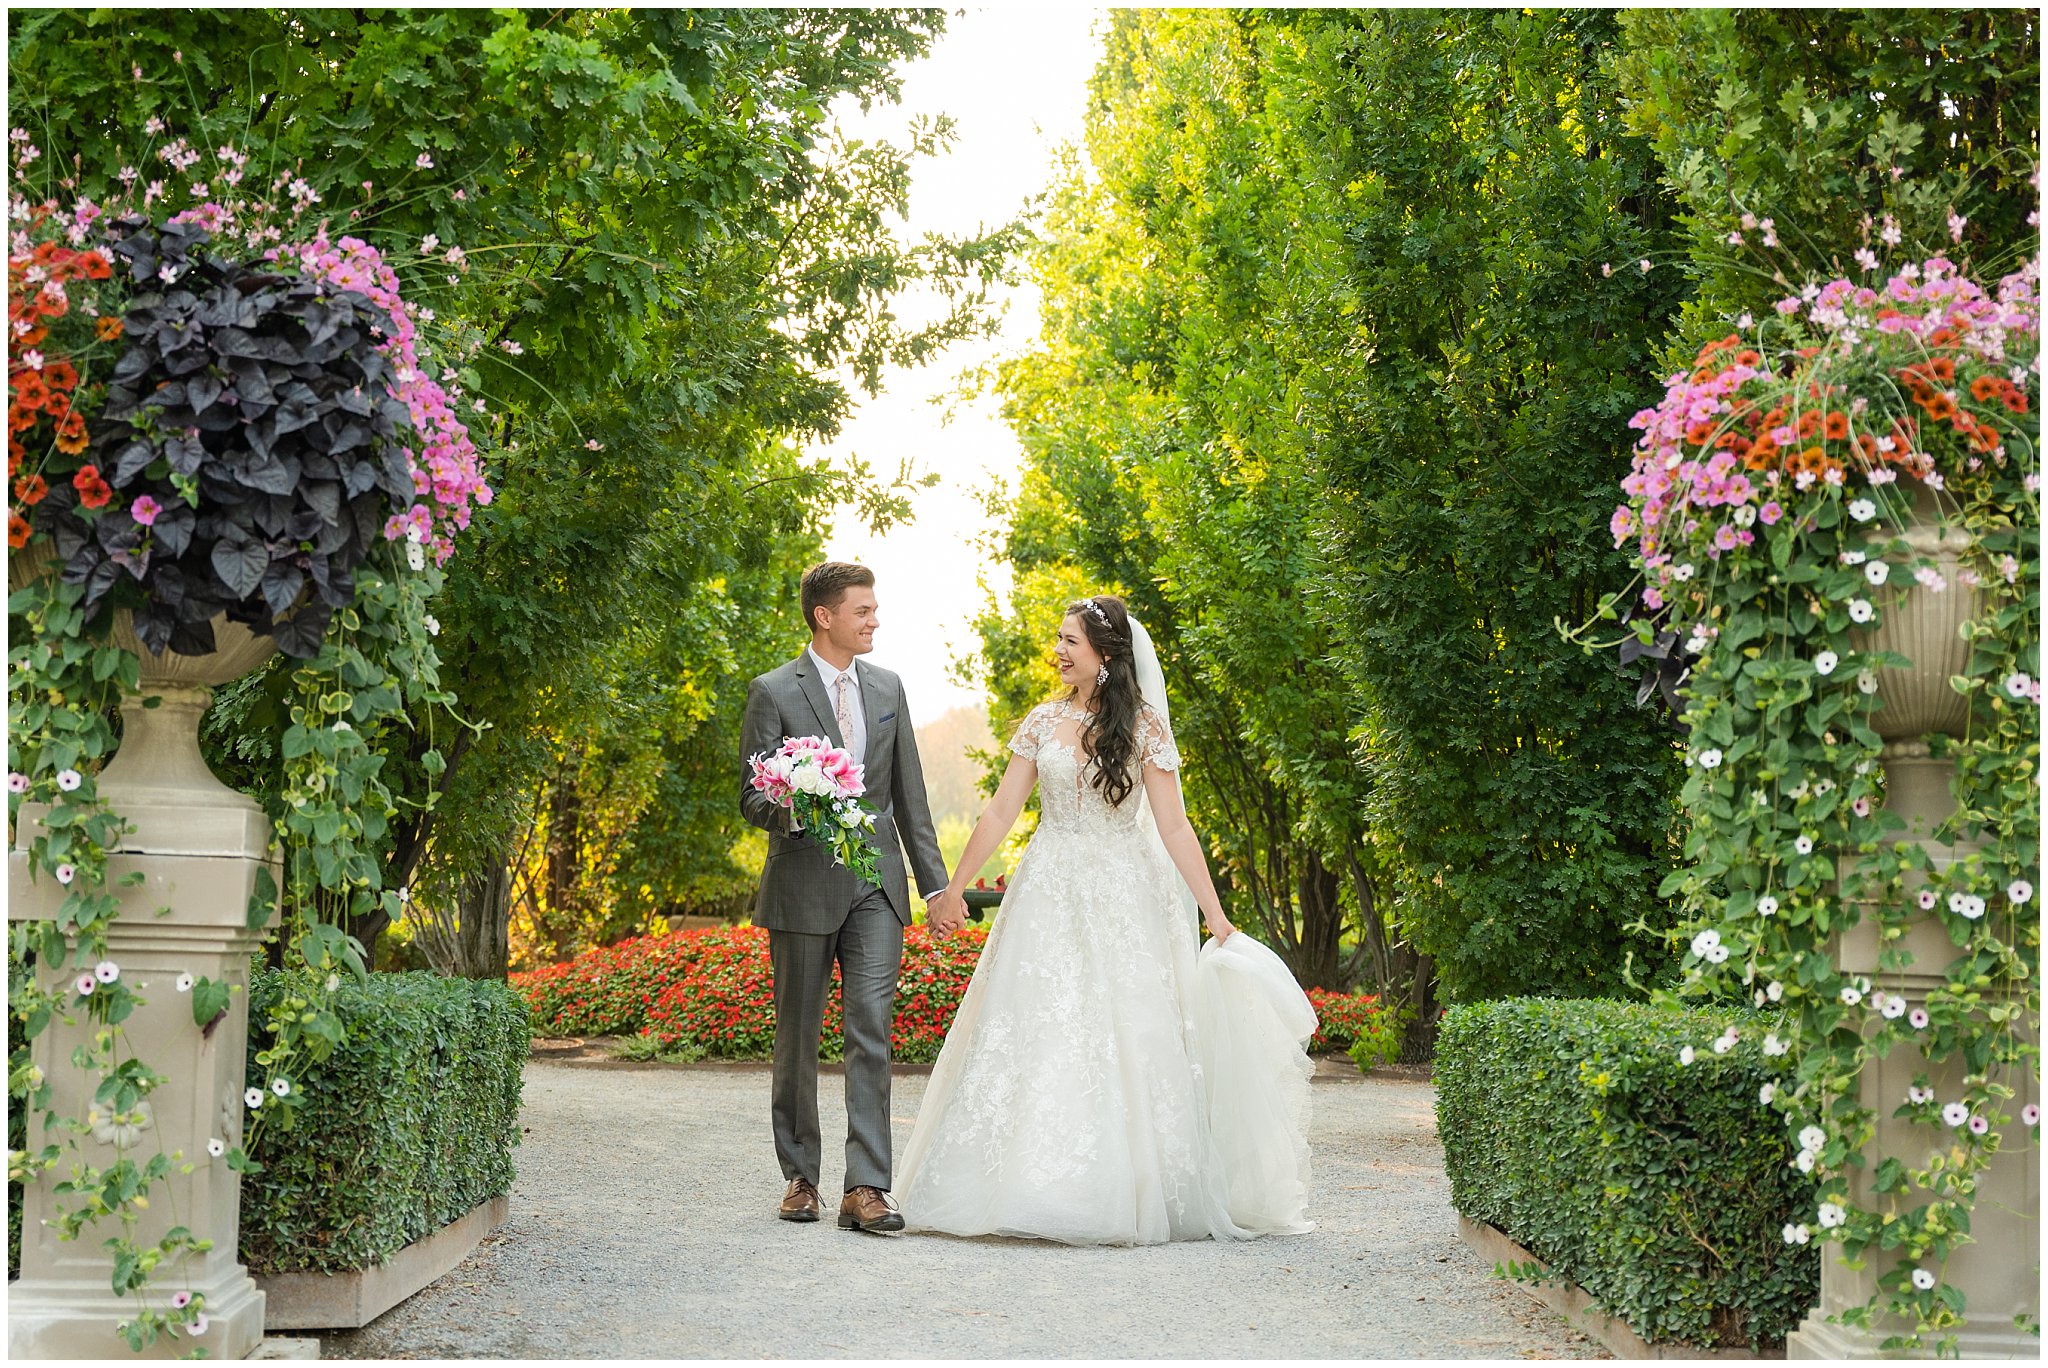 Bride and Groom walking during wedding portraits during the summer surrounded by flowers and gardens | Thanksgiving Point Ashton Garden Formal Session | Jessie and Dallin Photography